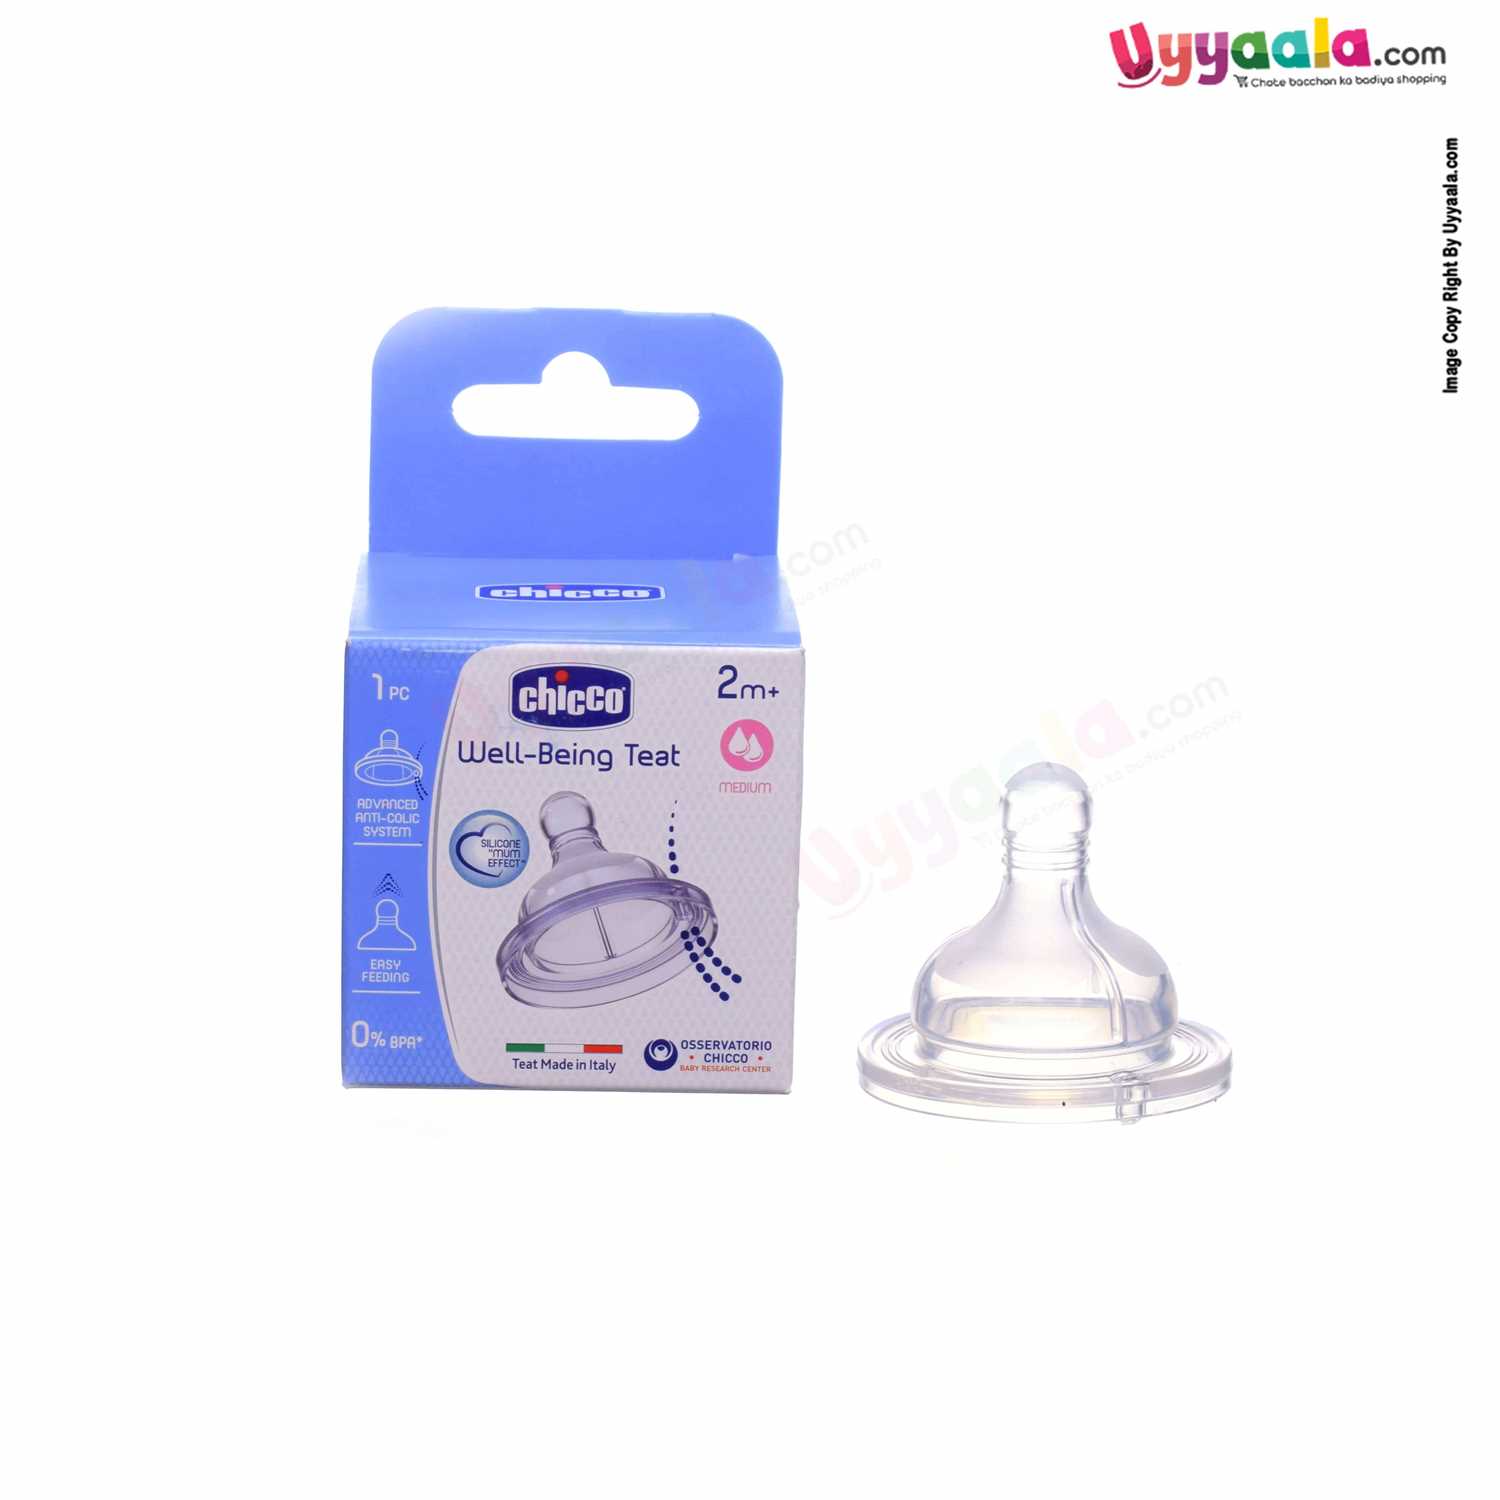 CHICCO Medium flow well being silicon teat, 1 pc - 2+m